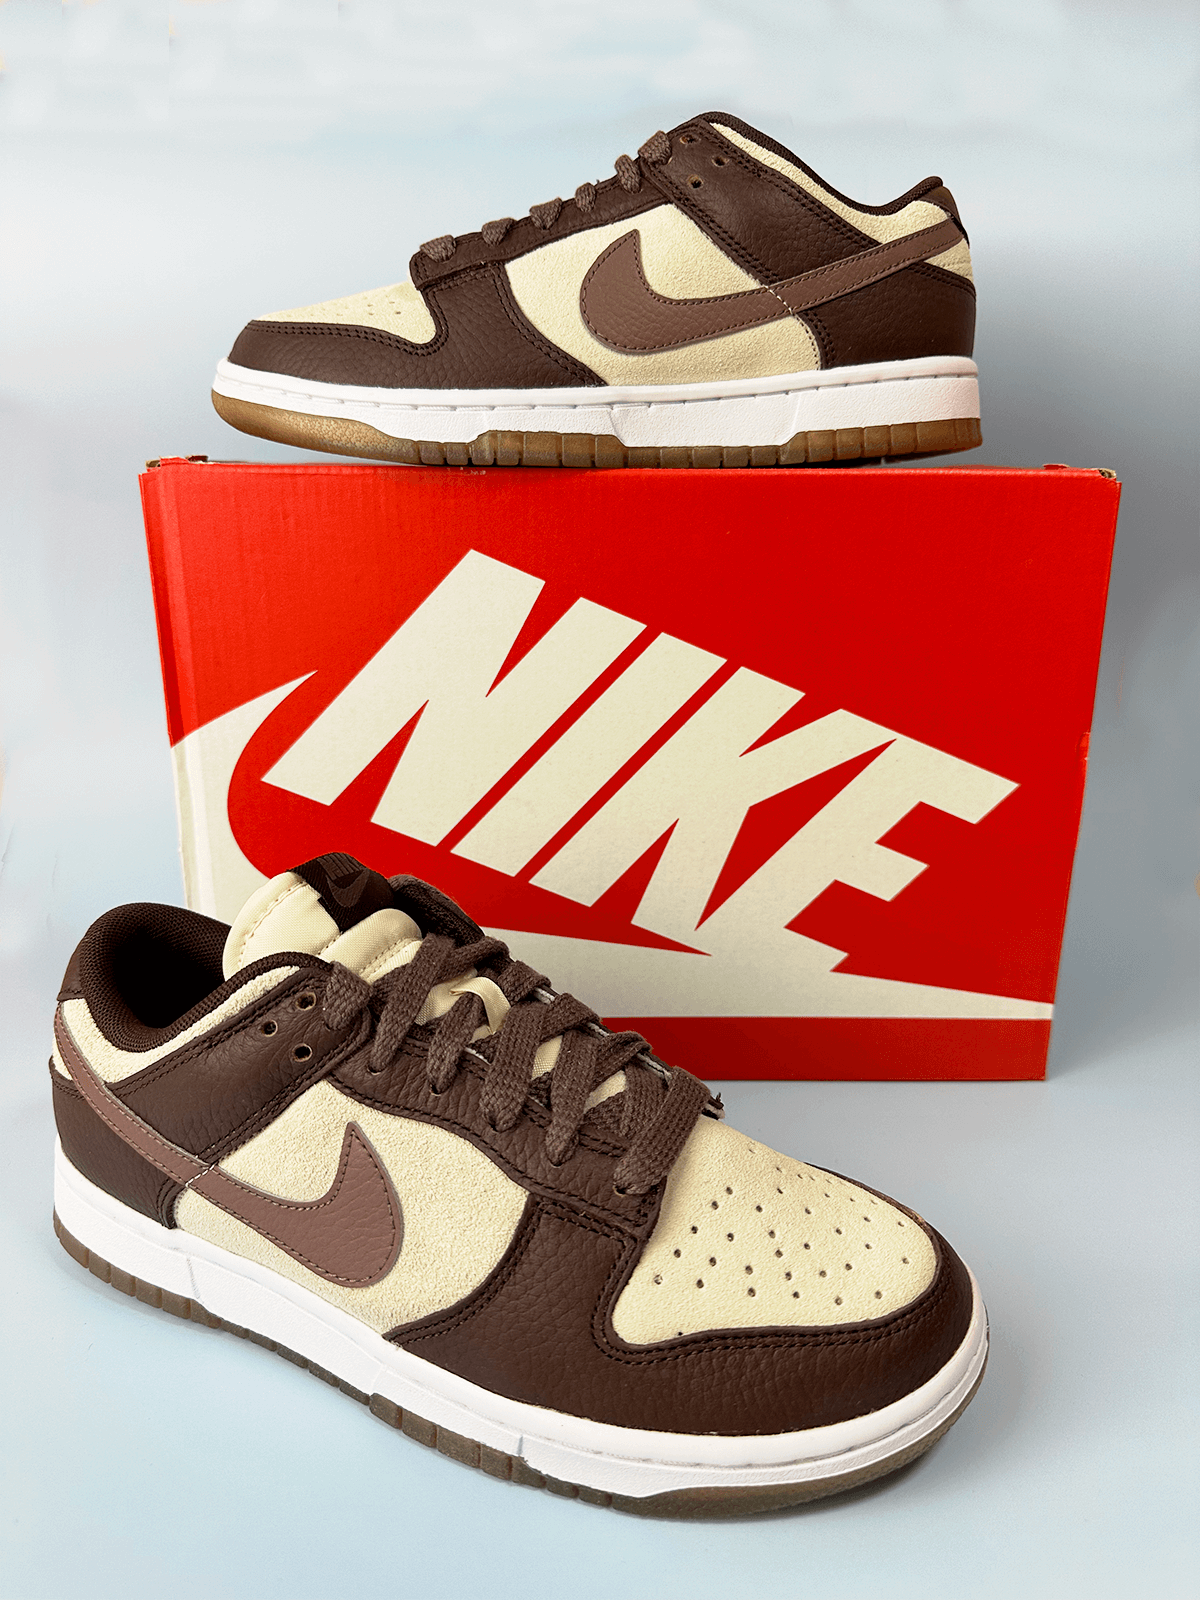 Nike SB Dunk Low Pro Chicago - Register Now on END. Launches